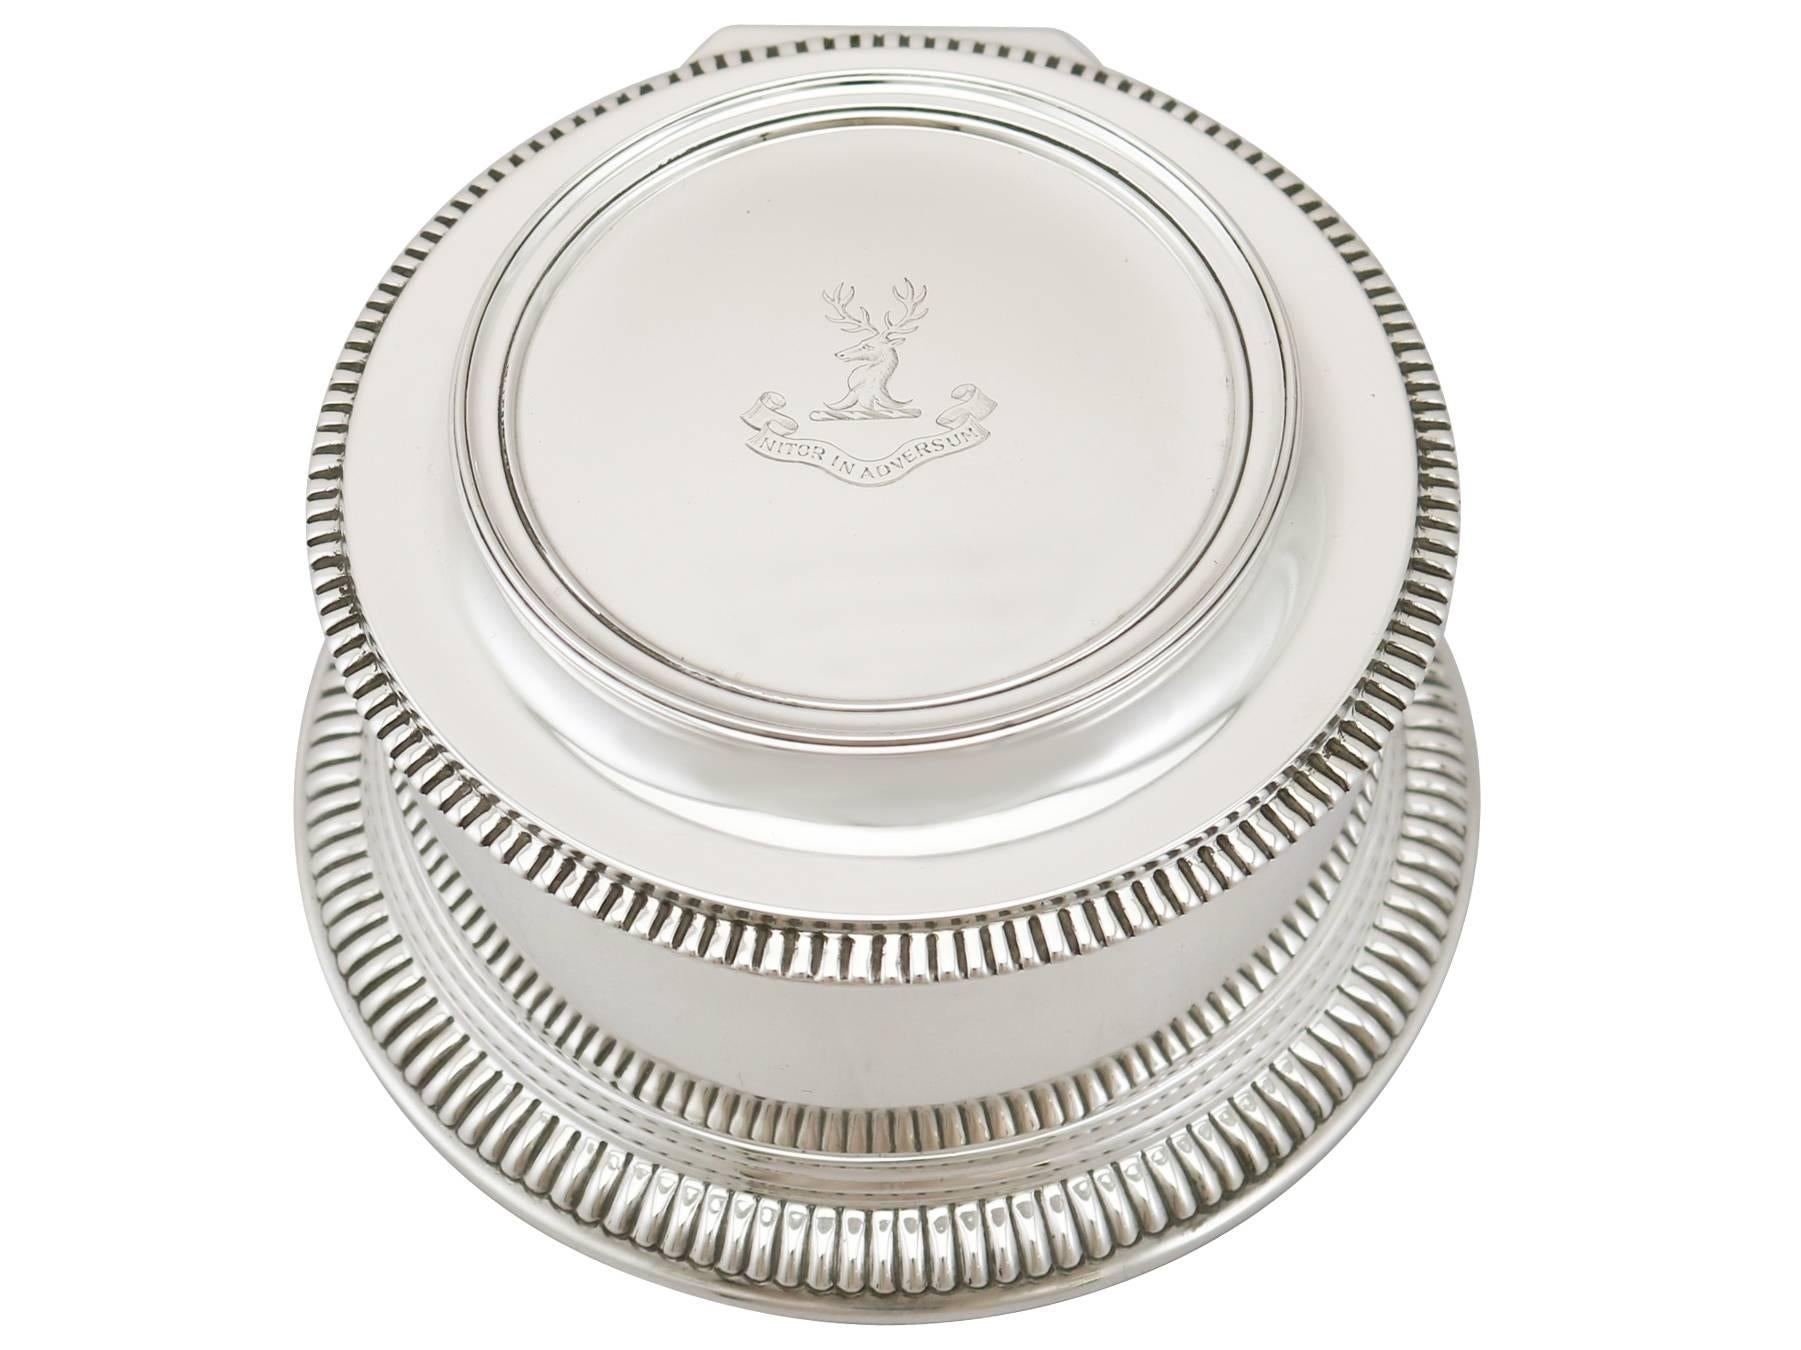 An exceptional, fine and impressive antique George V English sterling silver box made by Mappin & Webb Ltd; an addition to our ornamental silverware collection.

This exceptional antique George V sterling silver box has a circular swept form, in